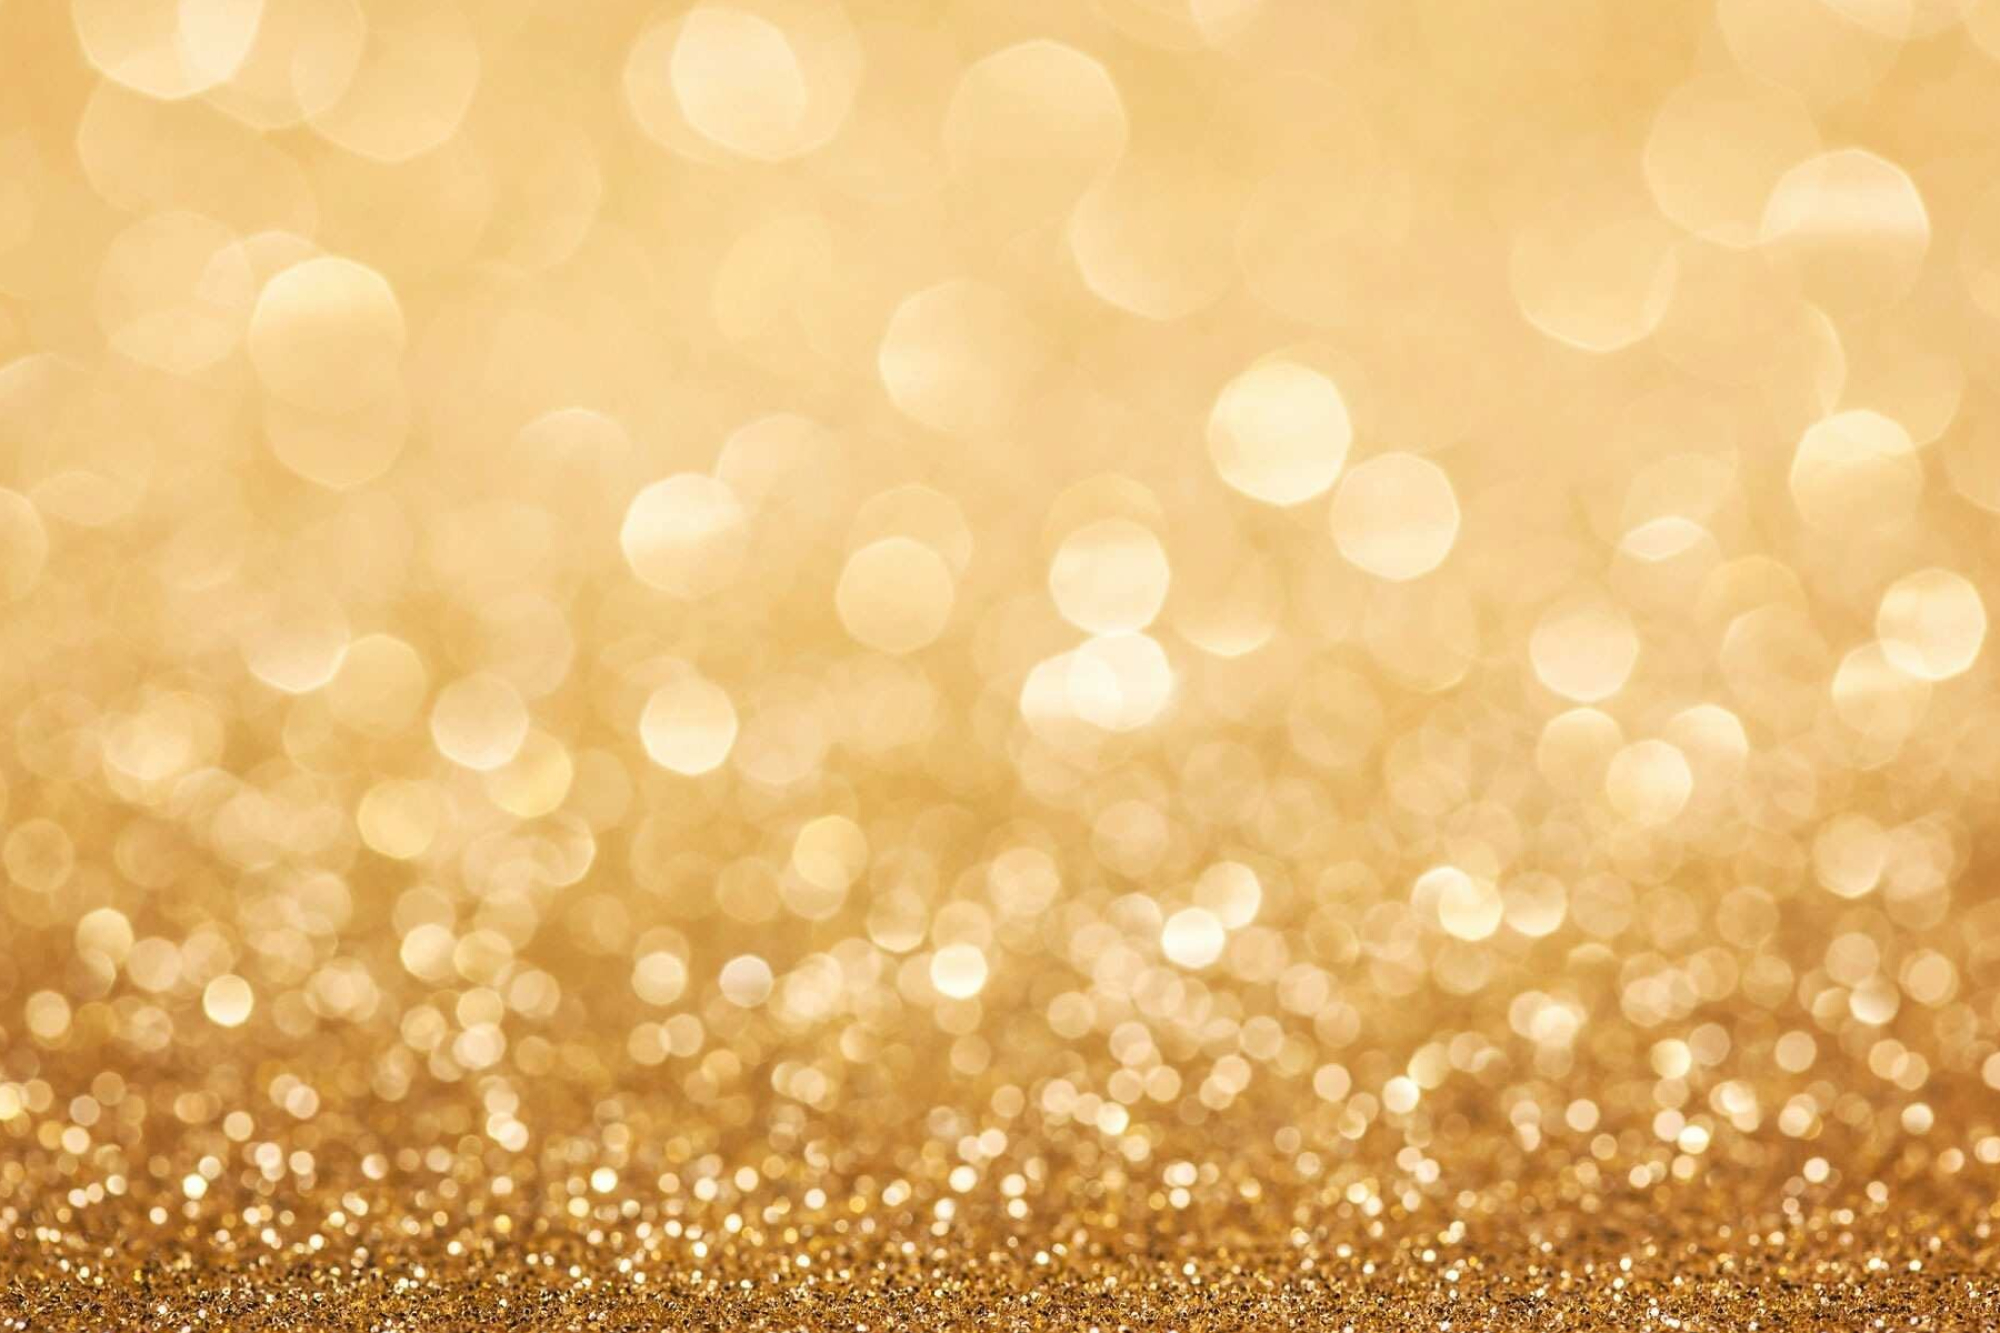 Gold Sparkle: Gold glitter powder, The flashy, sparkling tiny particles, Light-reflecting decorative material. 2000x1340 HD Wallpaper.